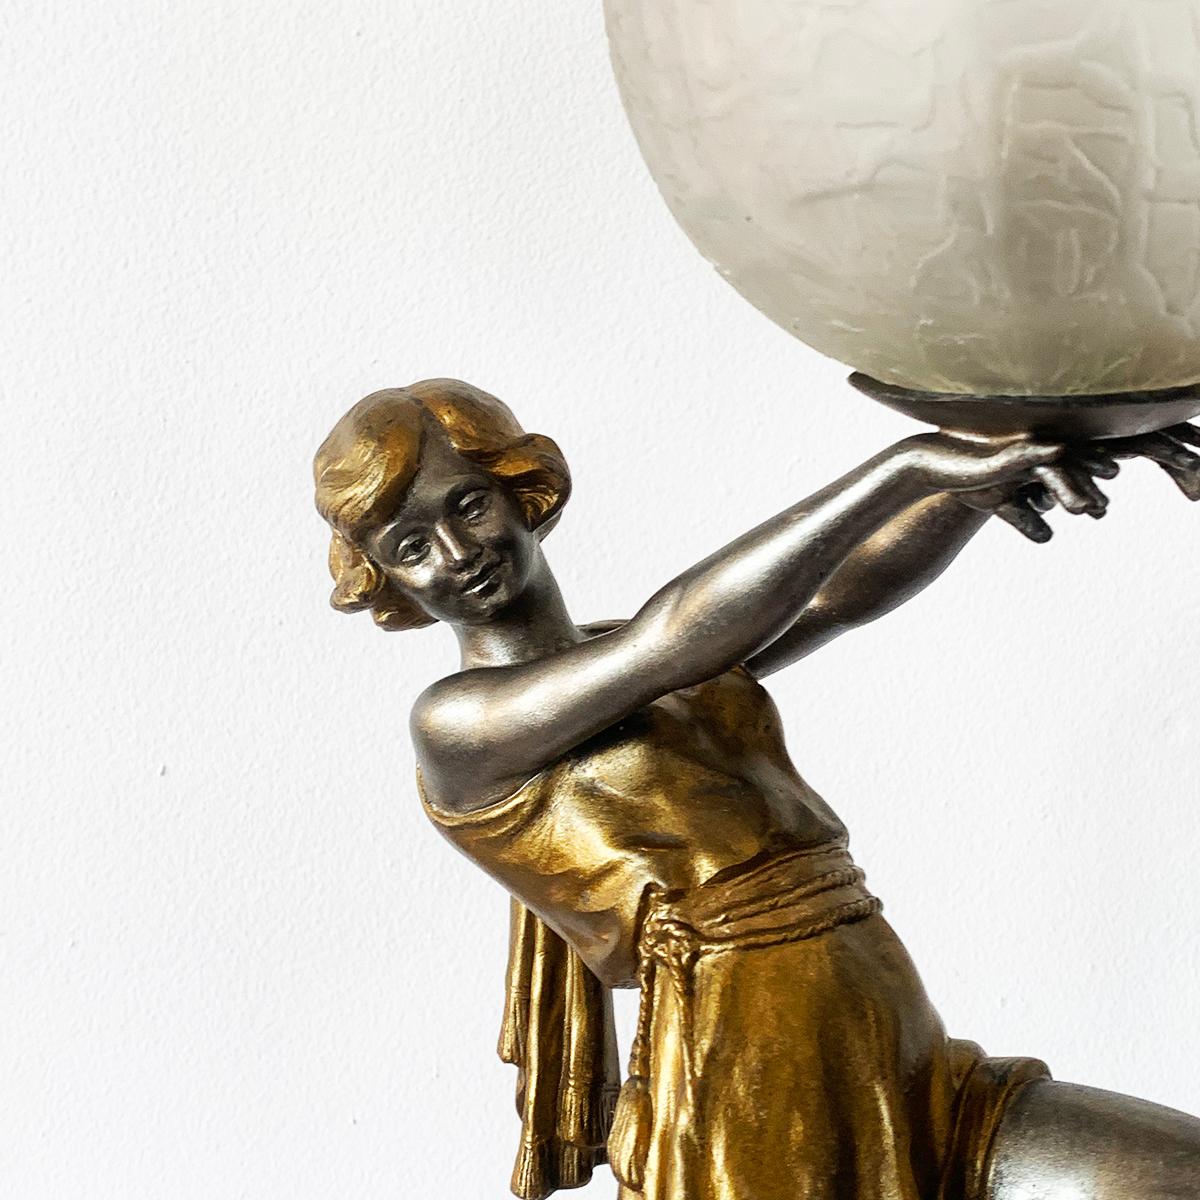 Art Deco French dancer lamp by Carlier. The dancer is holding an original glass brain shade in her hands on a finely detailed base. The original working wiring has been retained, France, circa 1920. Dimensions: Total height 52cm, marble base 9cm x